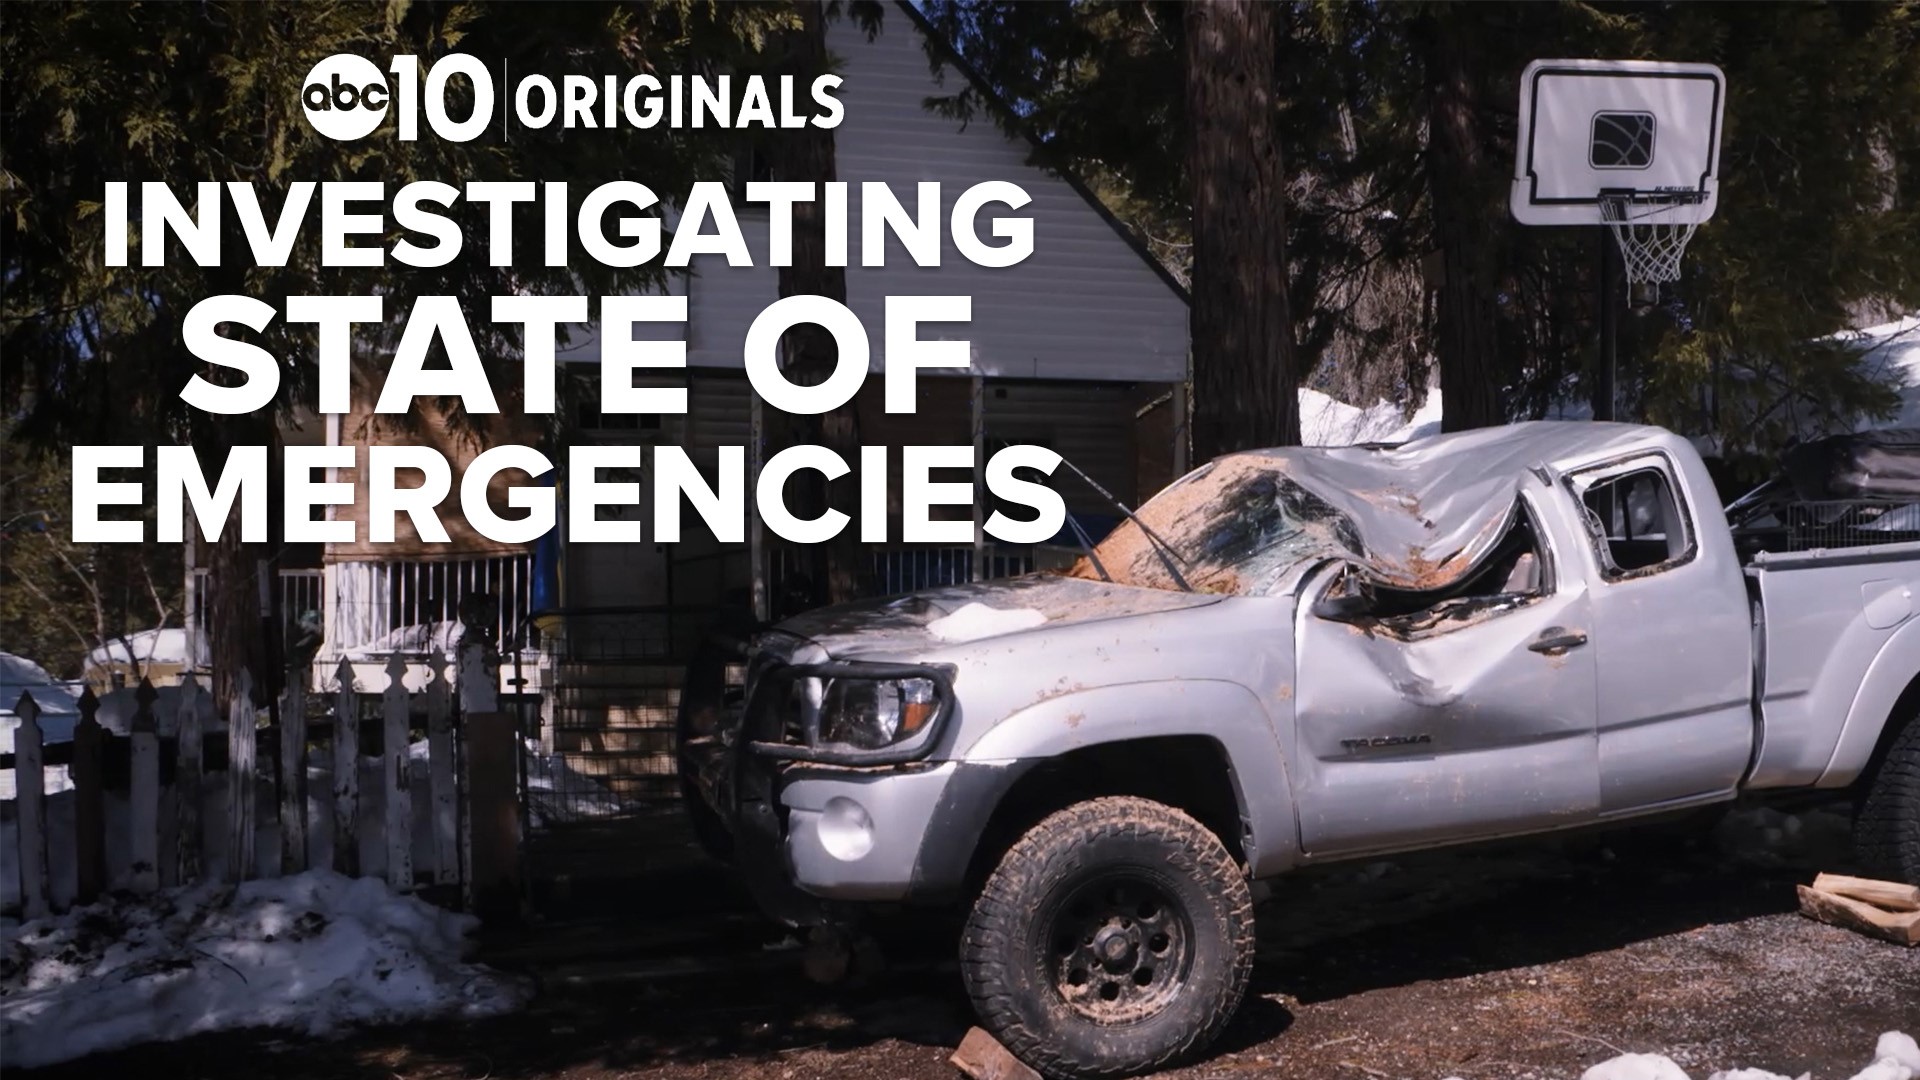 As winter storms continue to wreak havoc, ABC10 investigated why some counties in the region are on California's state of emergency list while others are not.